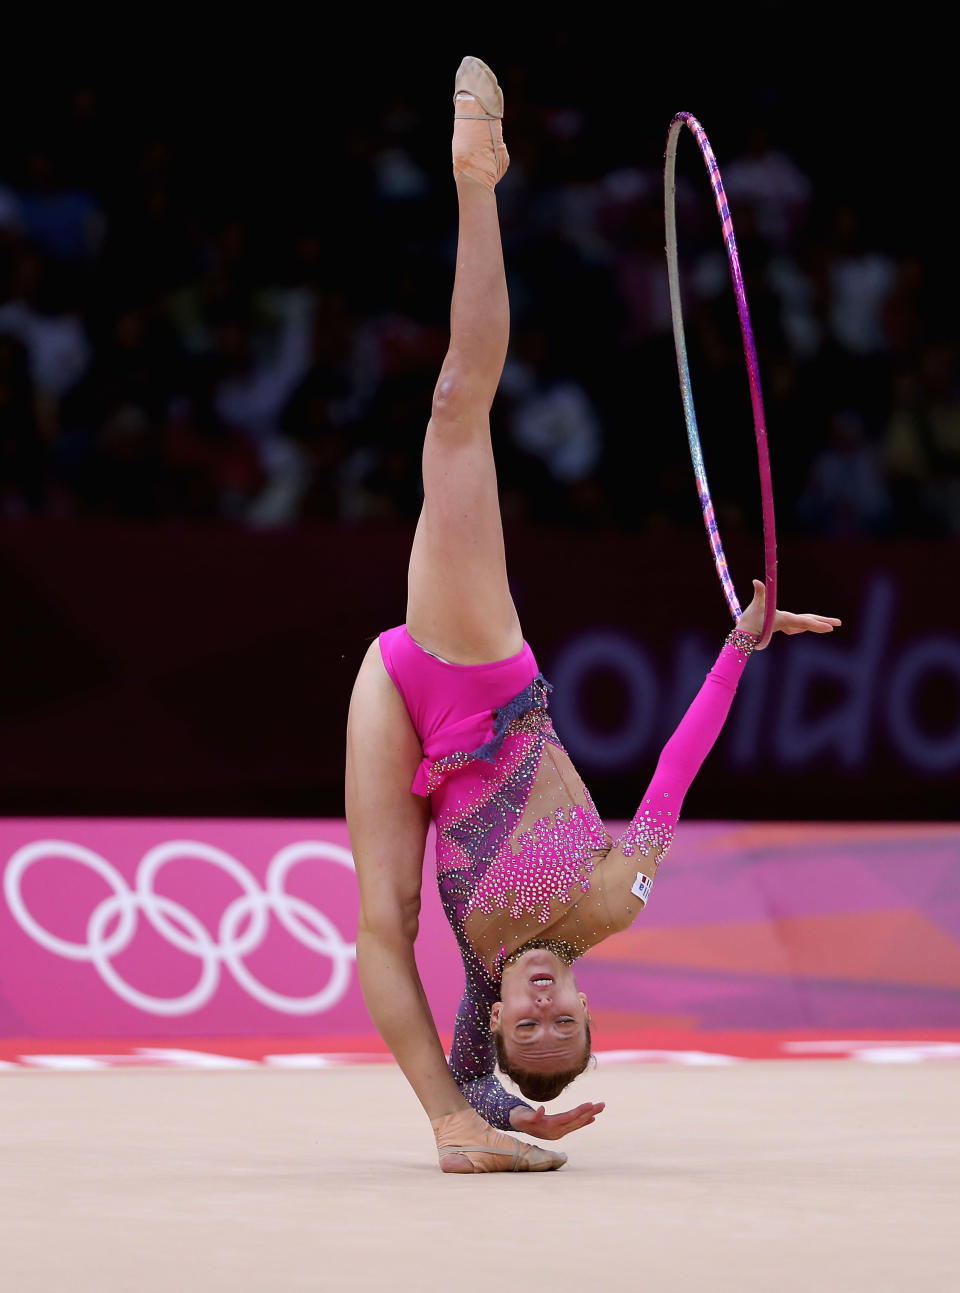 LONDON, ENGLAND - AUGUST 09: Julieta Cantaluppi of Italy performs with the hoop during the Rhythmic Gymnastics qualification on Day 13 of the London 2012 Olympics Games at Wembley Arena on August 9, 2012 in London, England. (Photo by Julian Finney/Getty Images)